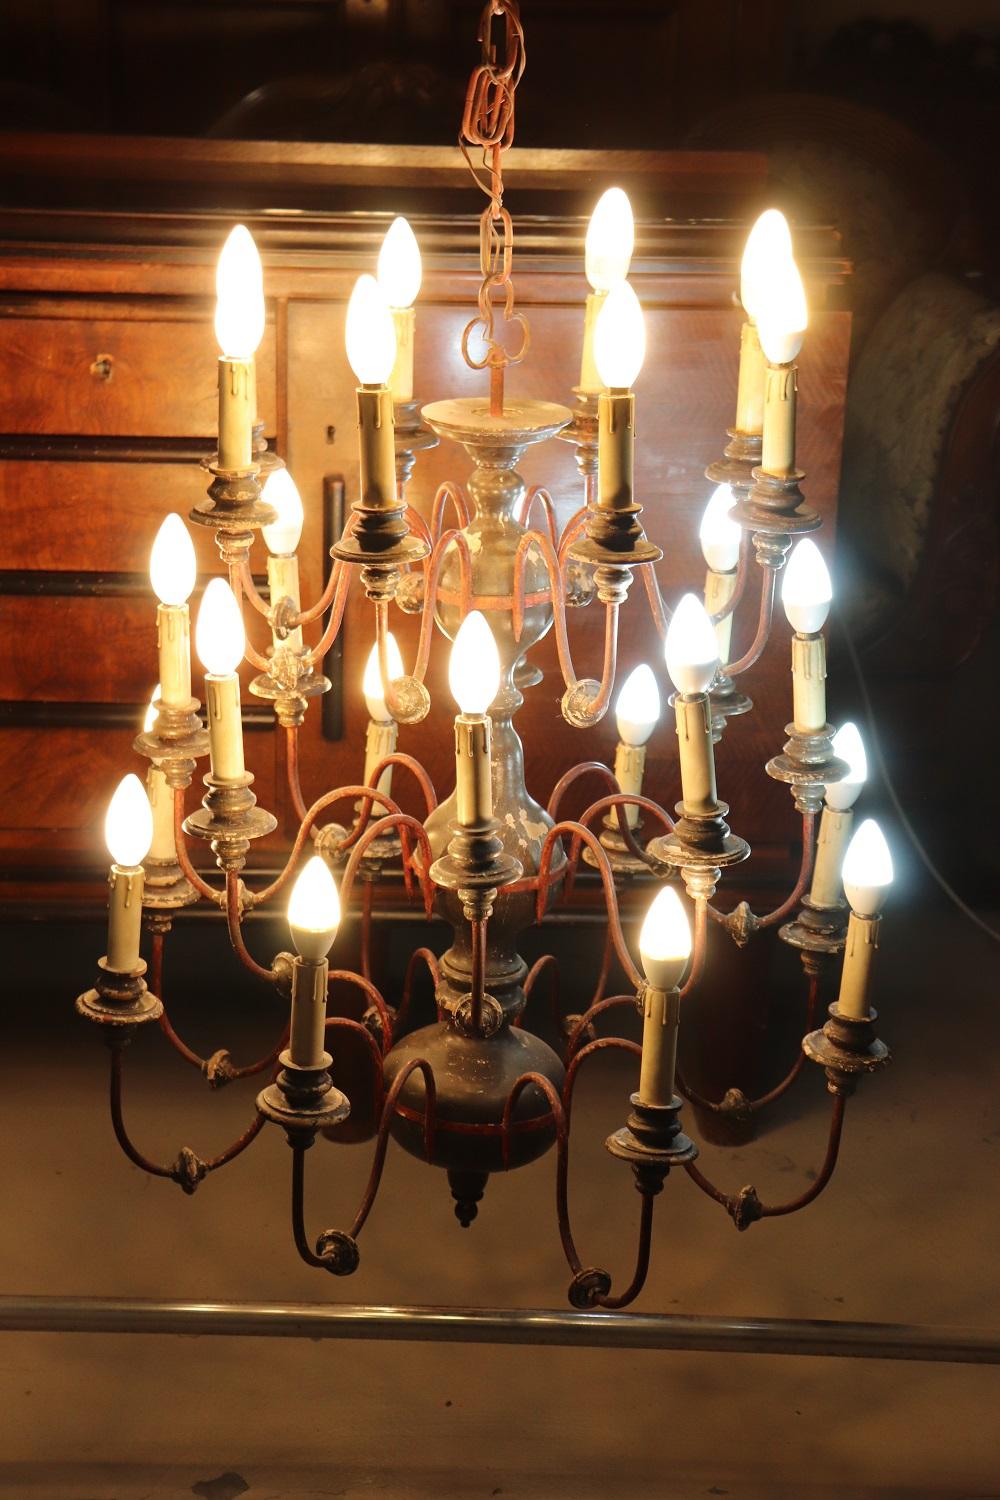 Lovely early 20th century antique large chandelier with twenty four bulbs arranged over three floors. This majestic antique chandelier is made of lacquered wood with dark red lacquered iron arms. It is a large chandelier perfect to be placed in a